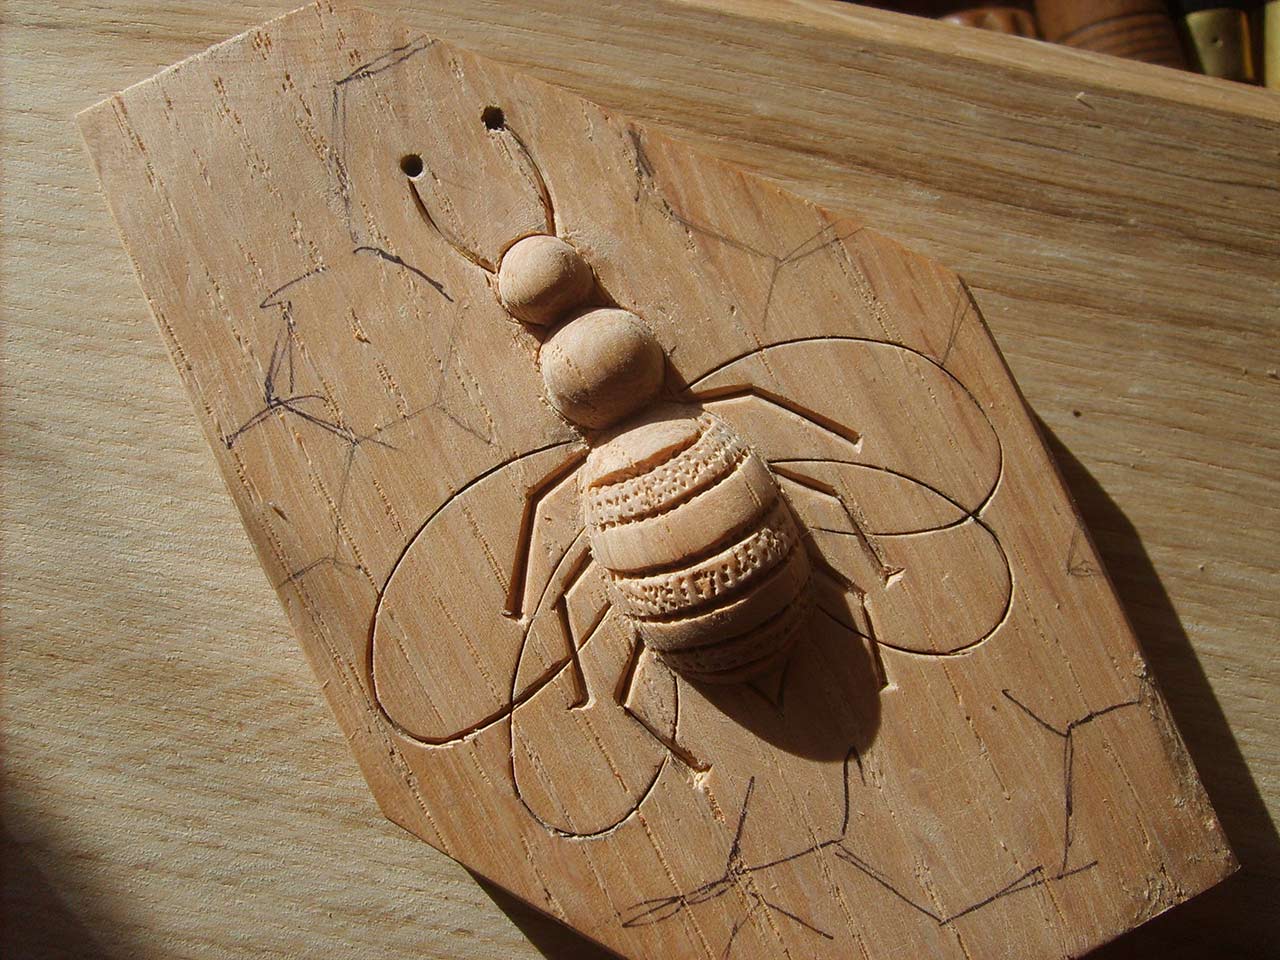 Part way through a bee carving